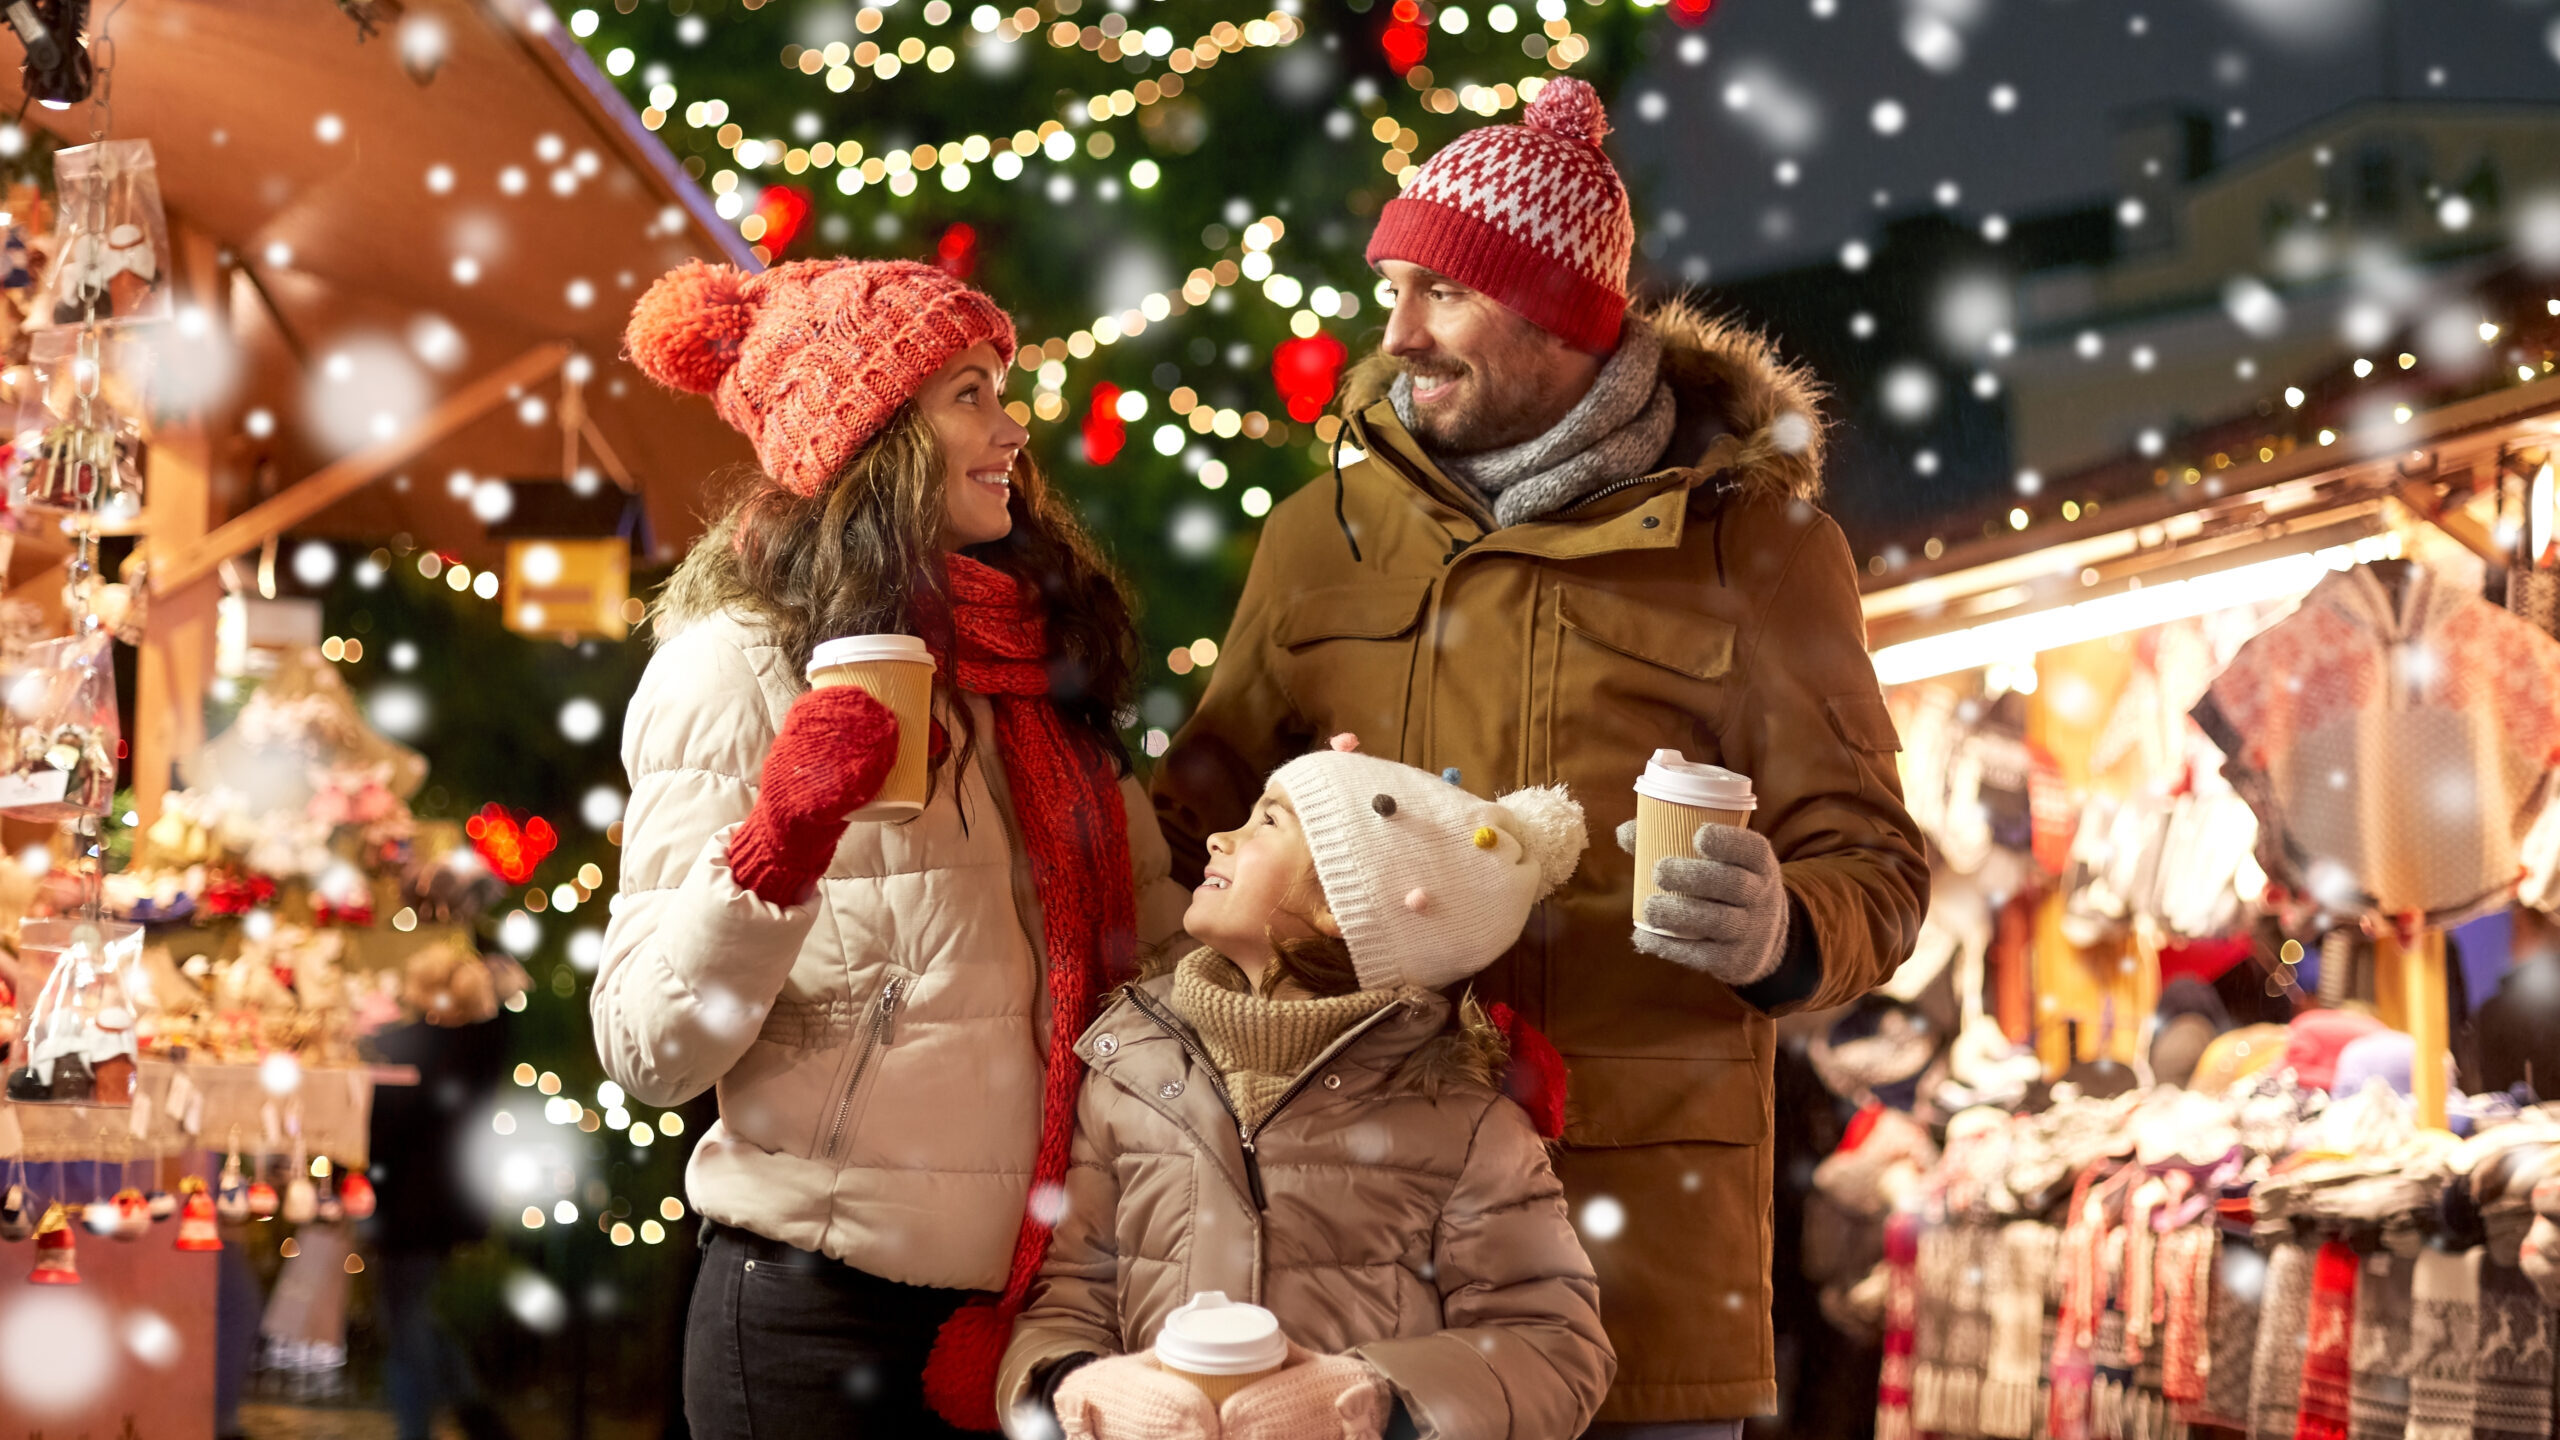 The Best Christmas Markets In Europe